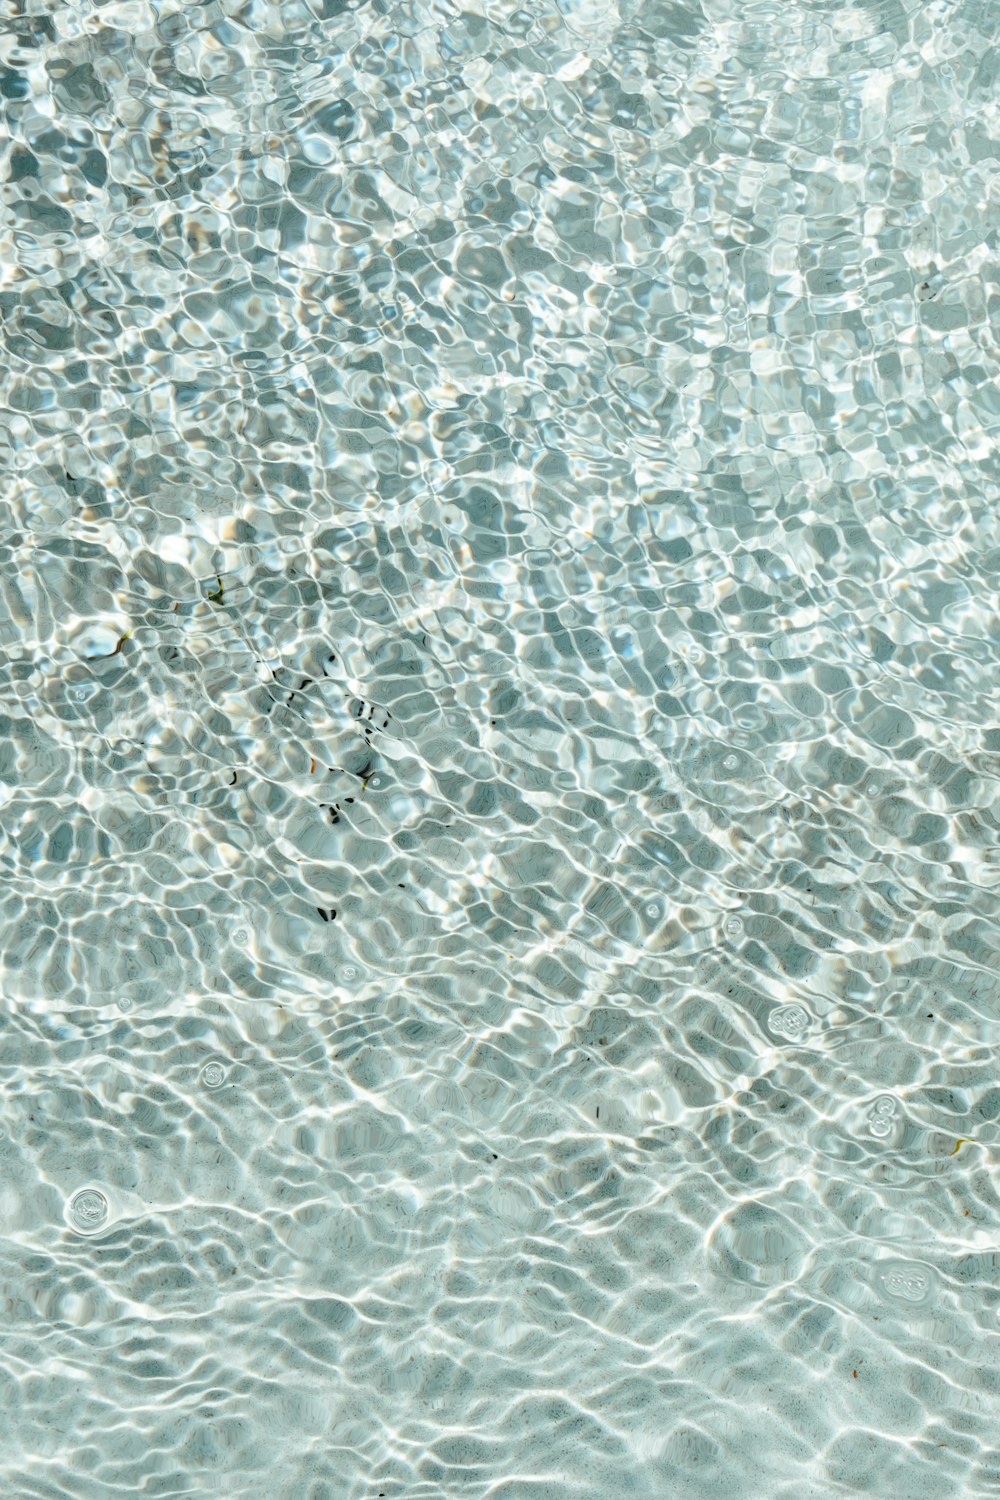 a close up of a pool with water ripples